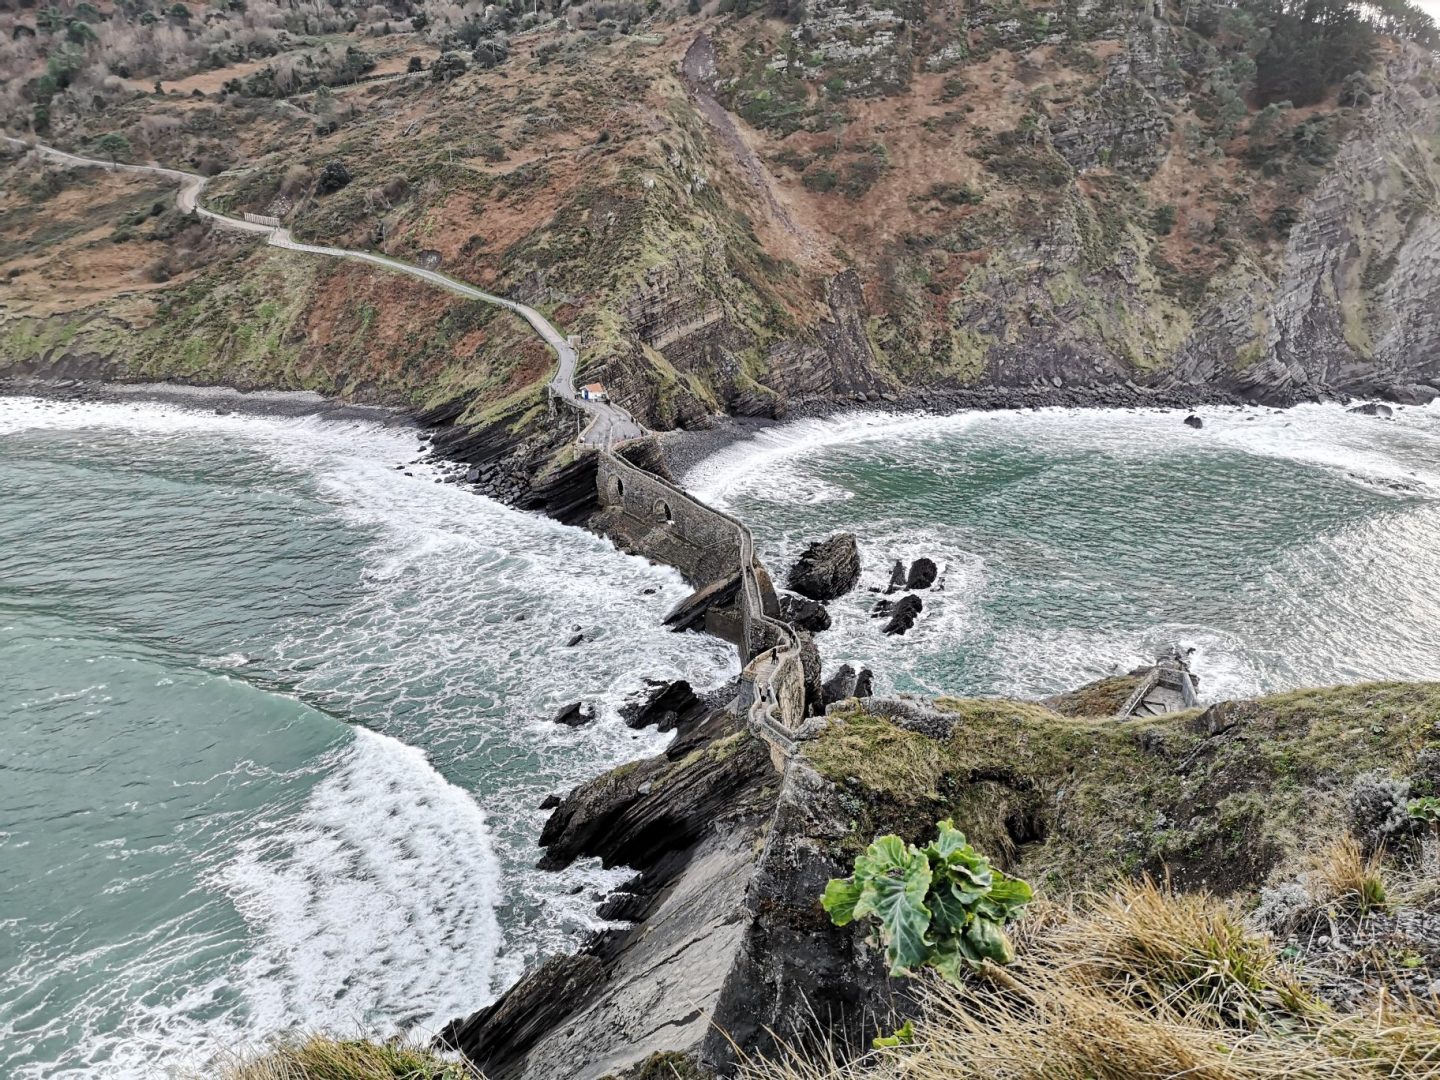 How to visit Dragonstone in real life: from Bilbao to San Juan de  Gaztelugatxe - The Occasional Traveller